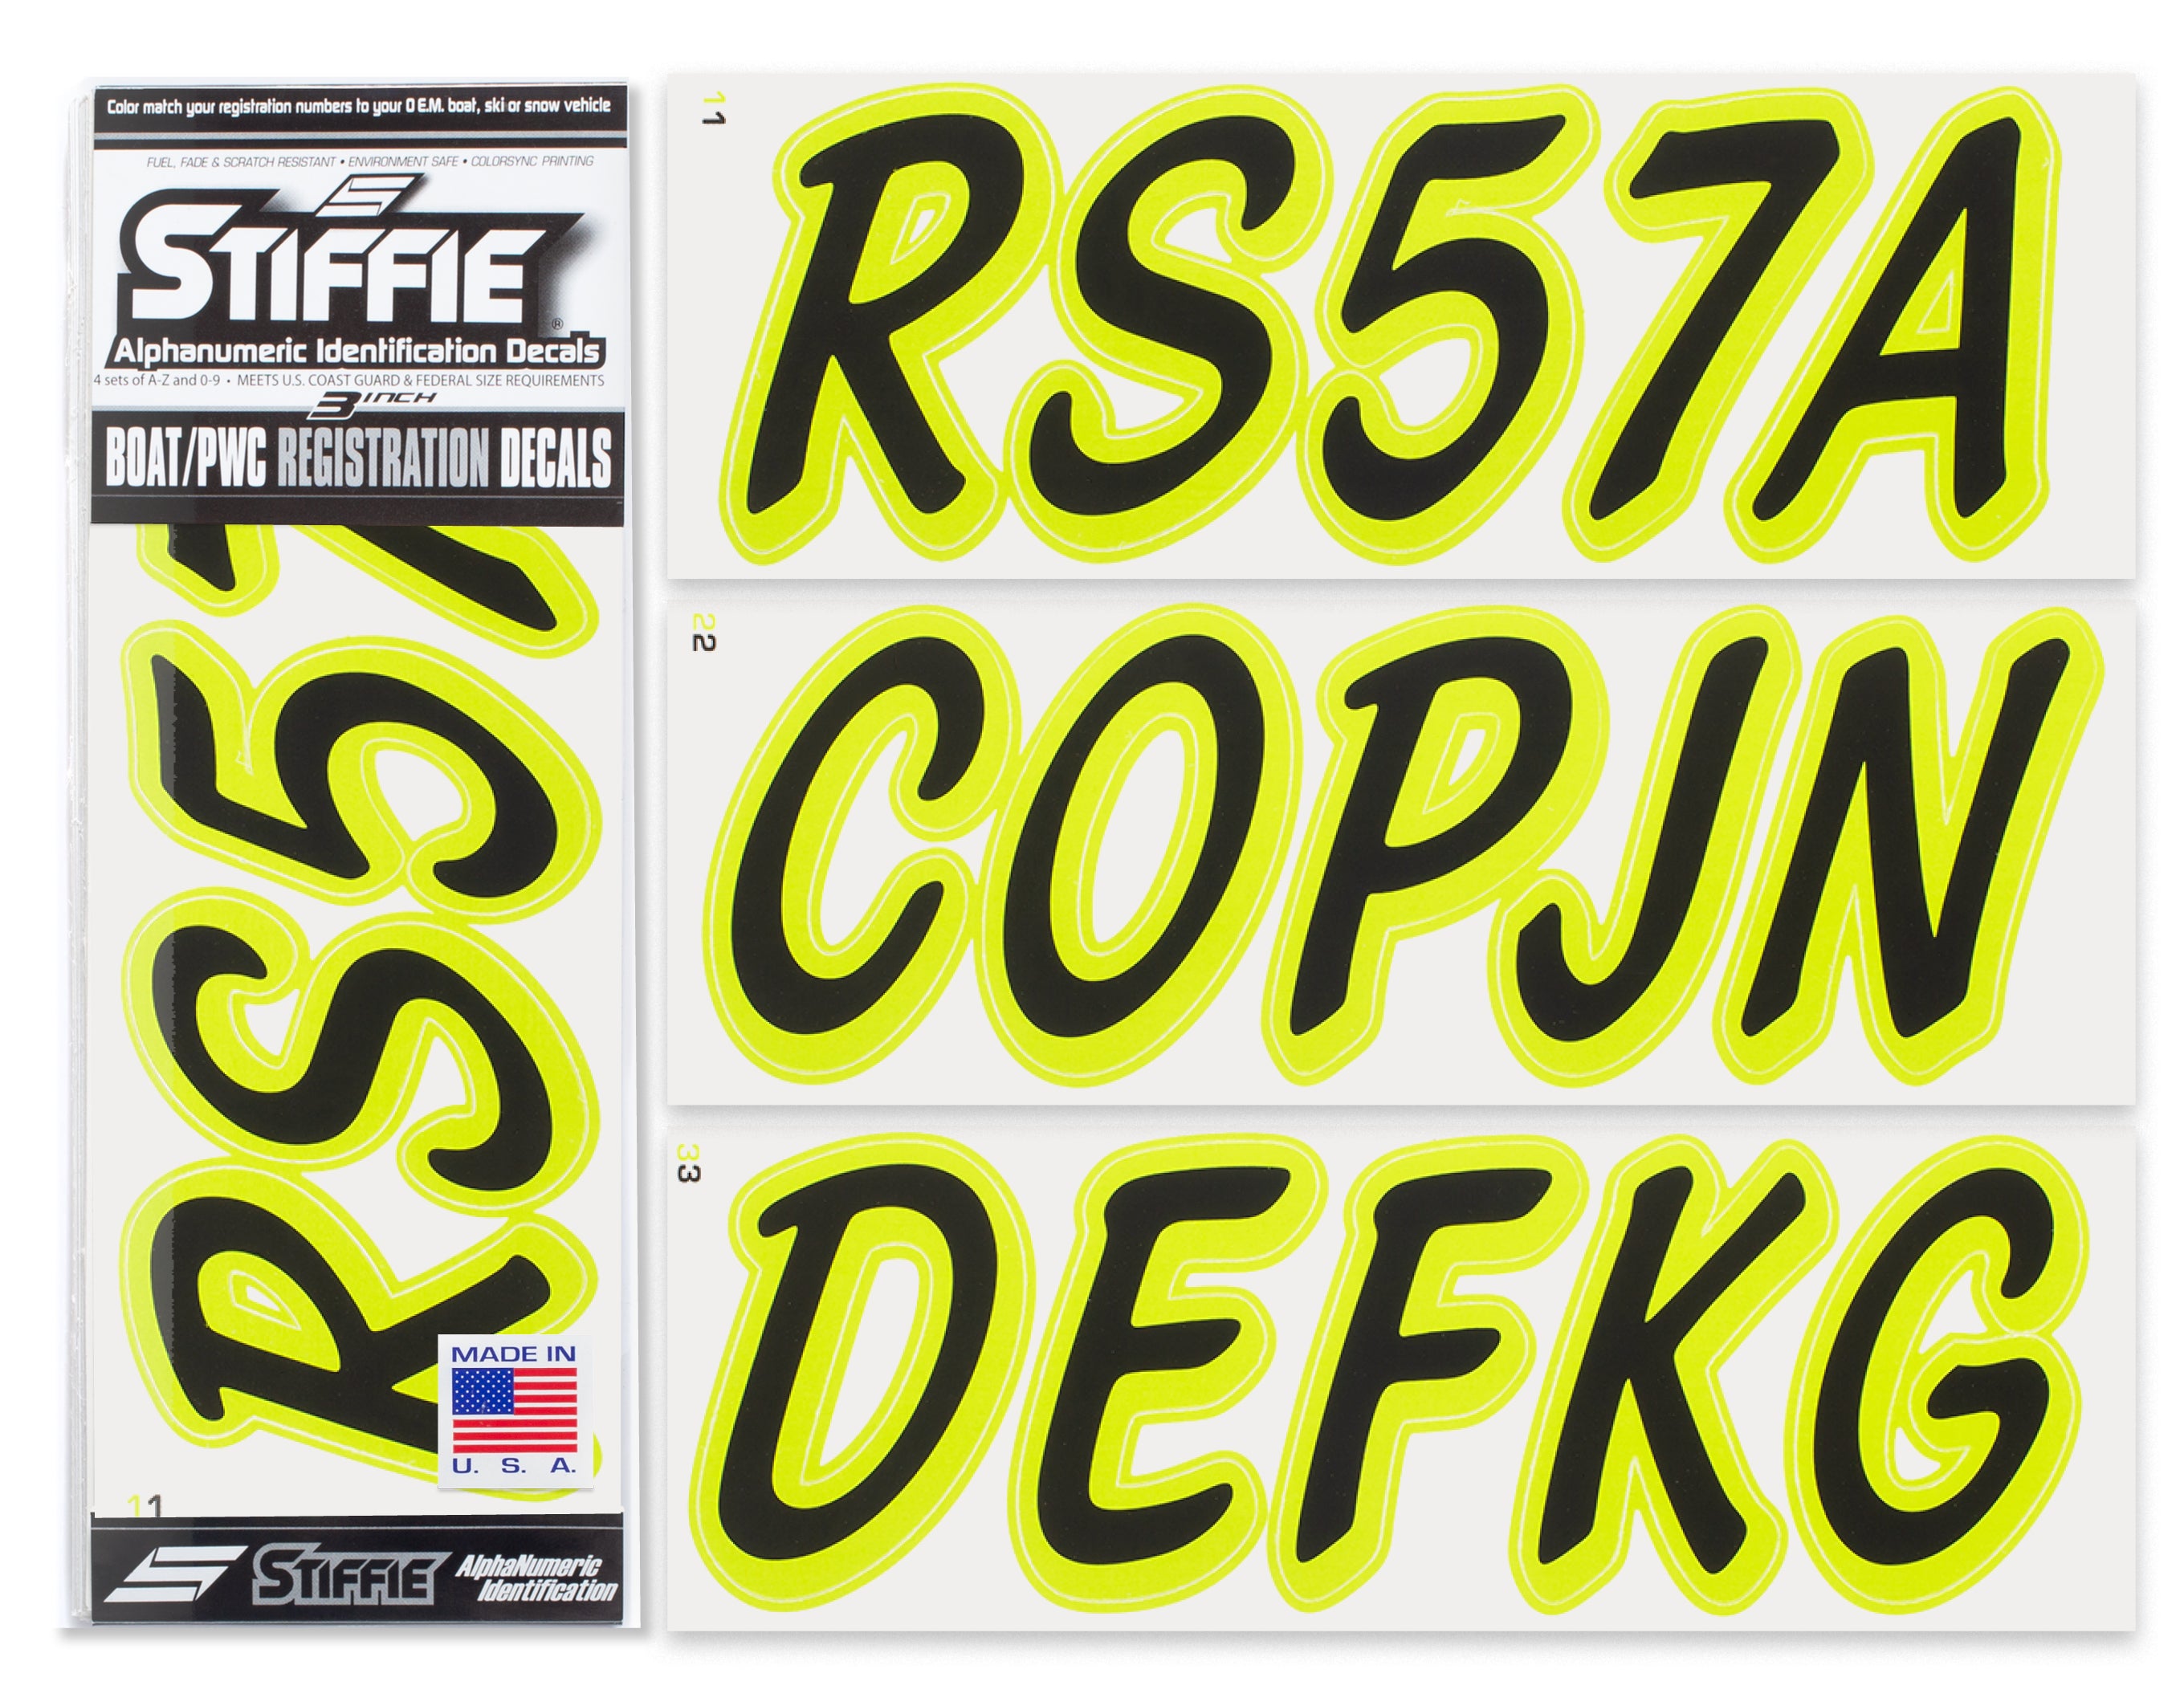 STIFFIE Whipline Solid Black/Electric Lime 3" Alpha-Numeric Registration Identification Numbers Stickers Decals for Boats & Personal Watercraft